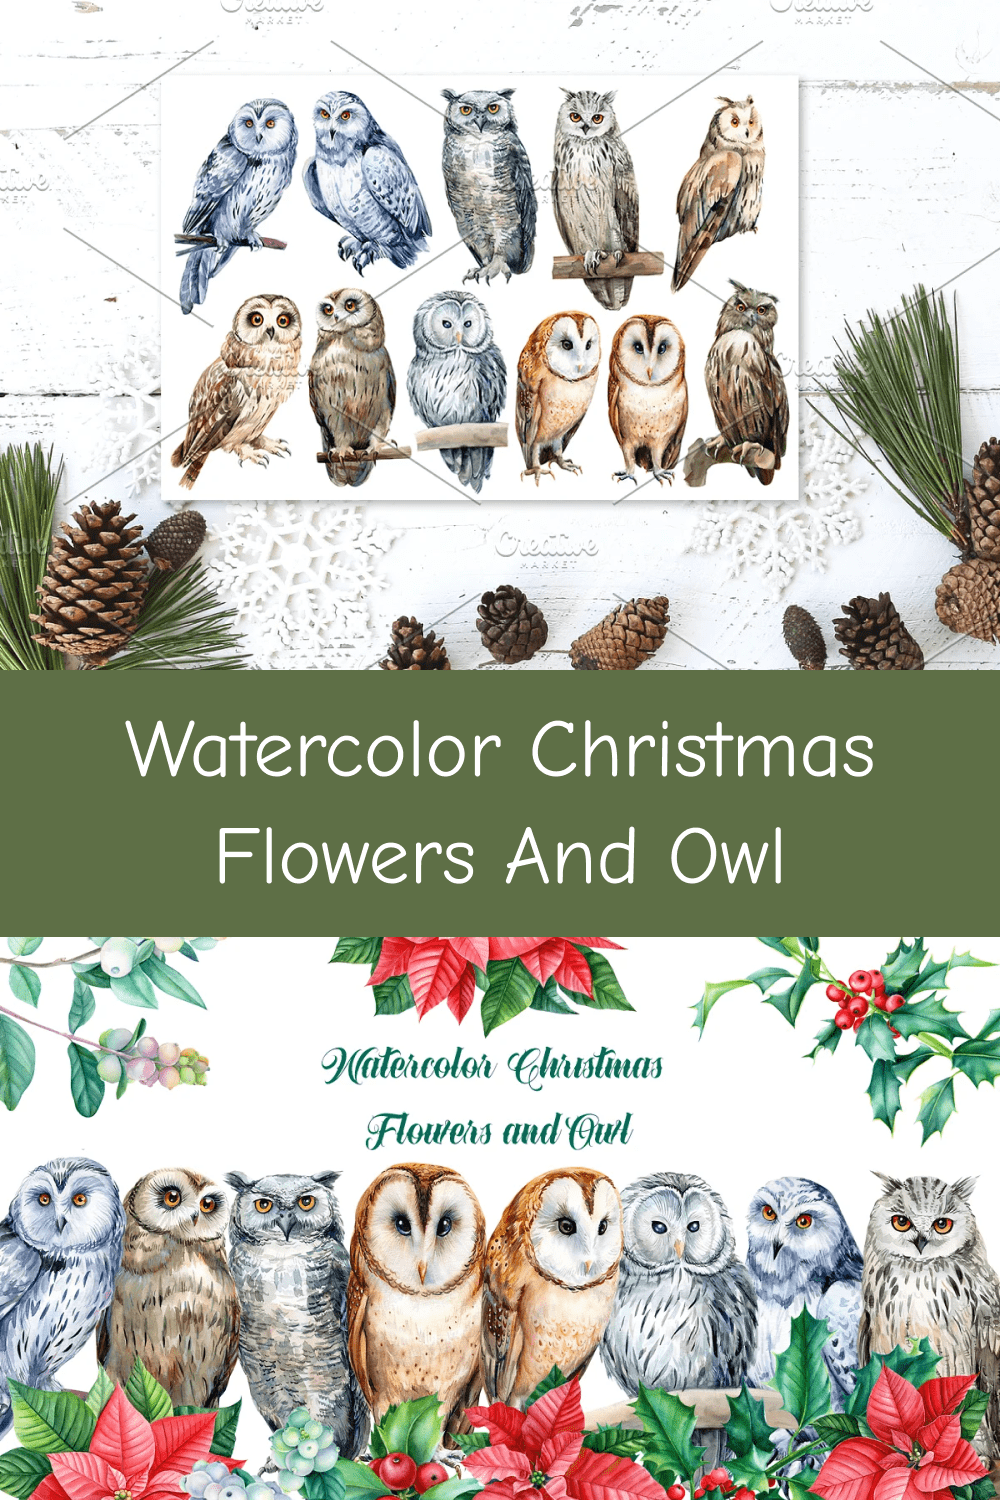 Watercolor Christmas Flowers and Owl.